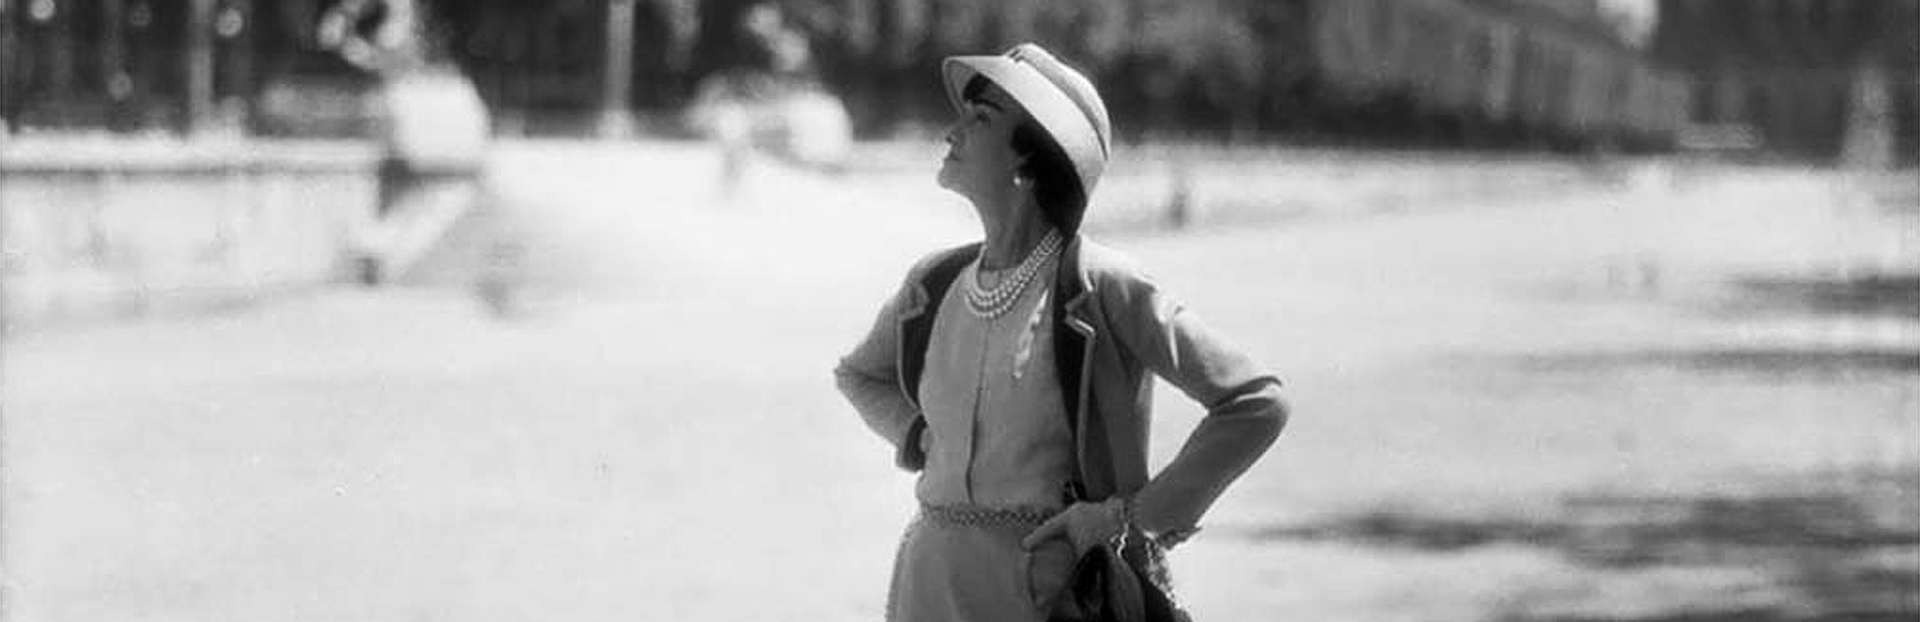 coco-chanel-tuilleries